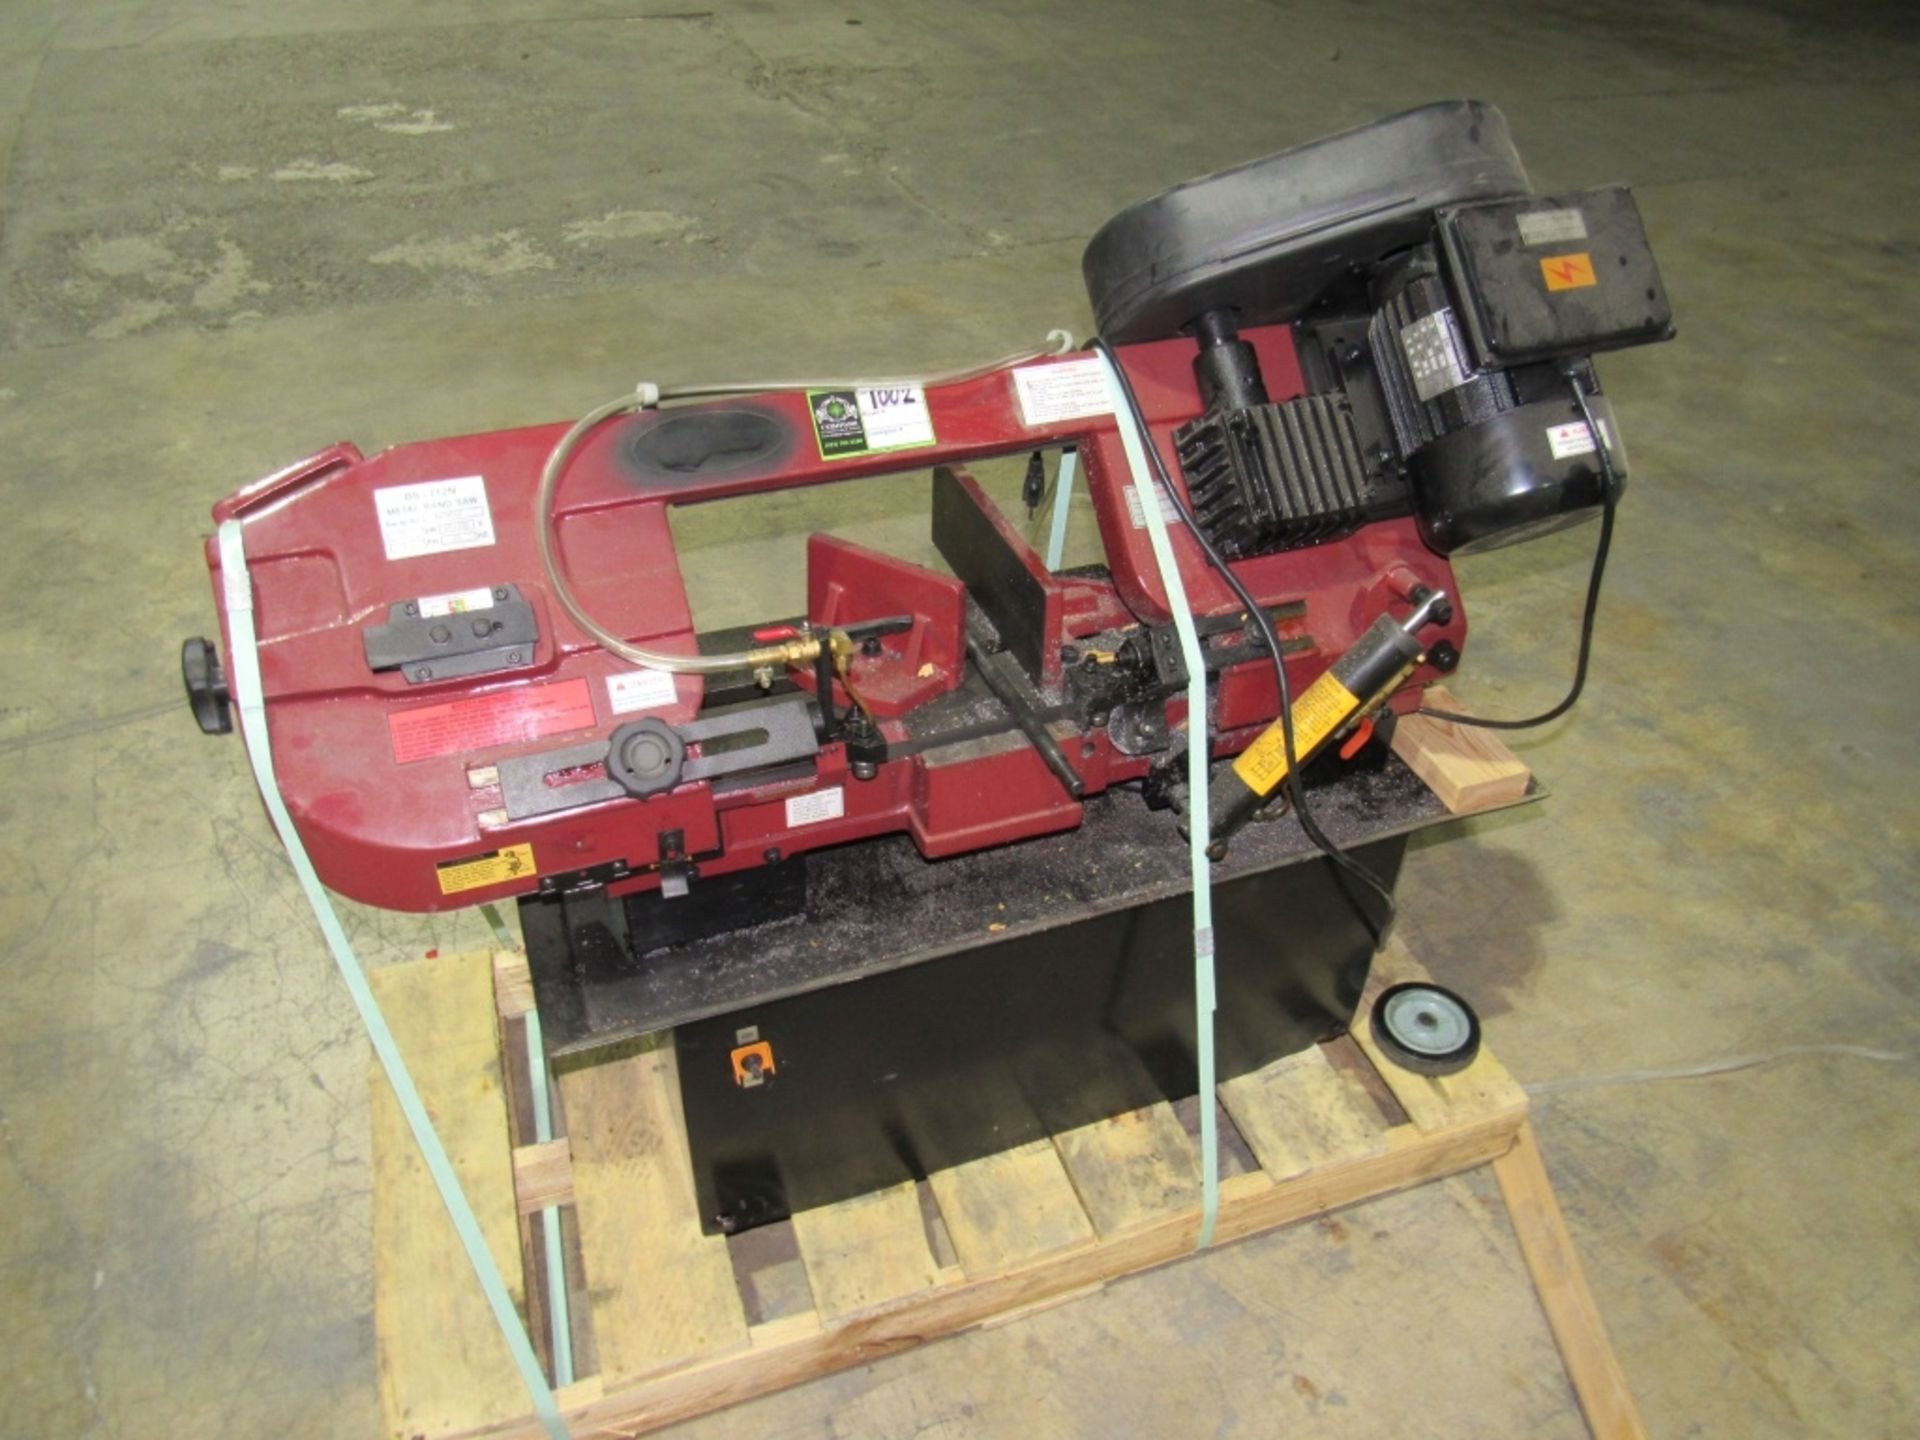 Metal Band Saw- MFR - Unknown Model - BS-712N 115/230 Volts 11 kW 1 Phase Overall Dimensions - 49" x